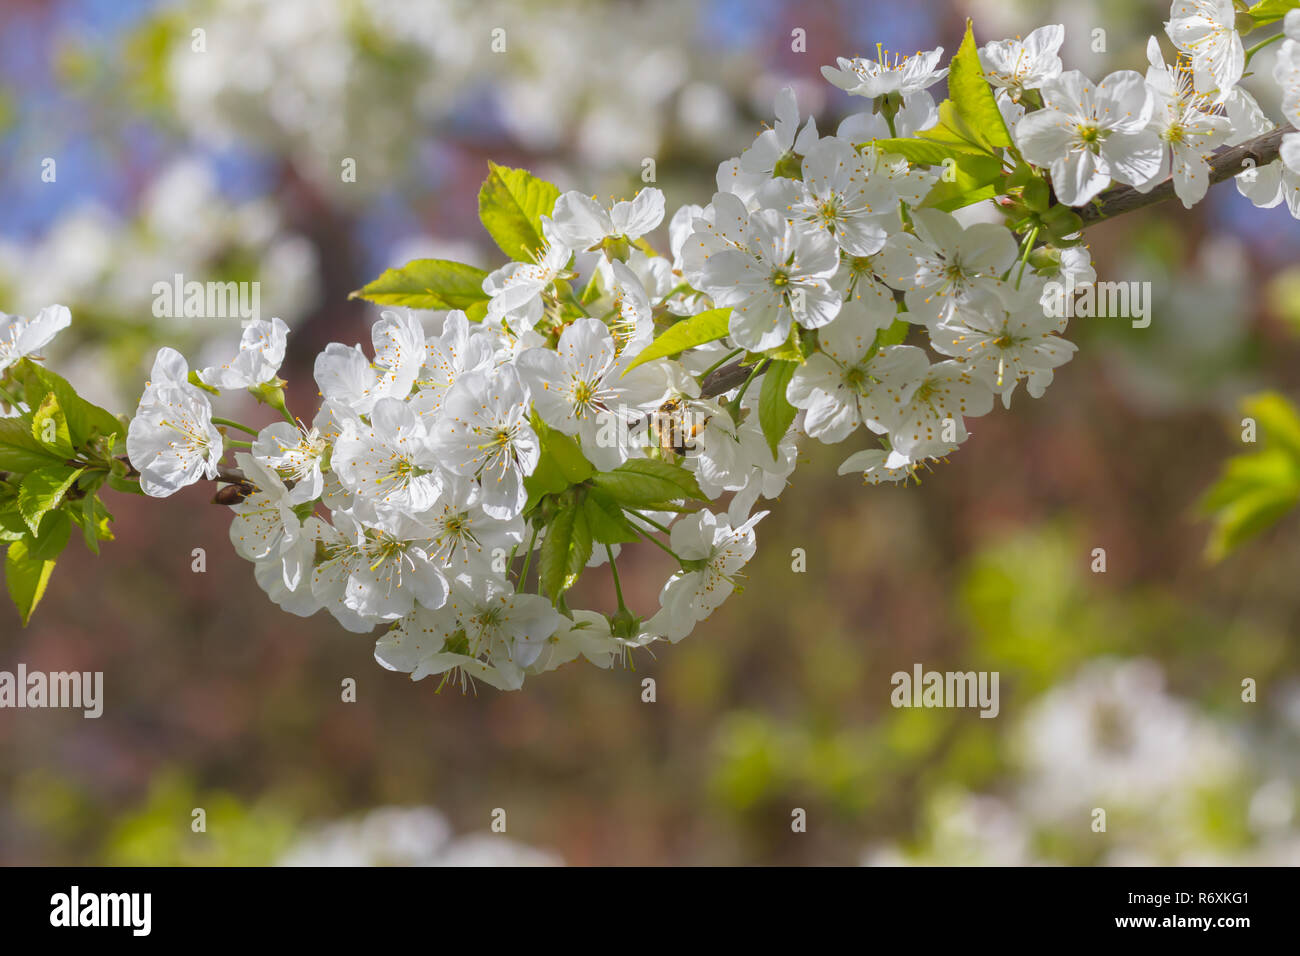 Bees and cherry blossoms Stock Photo